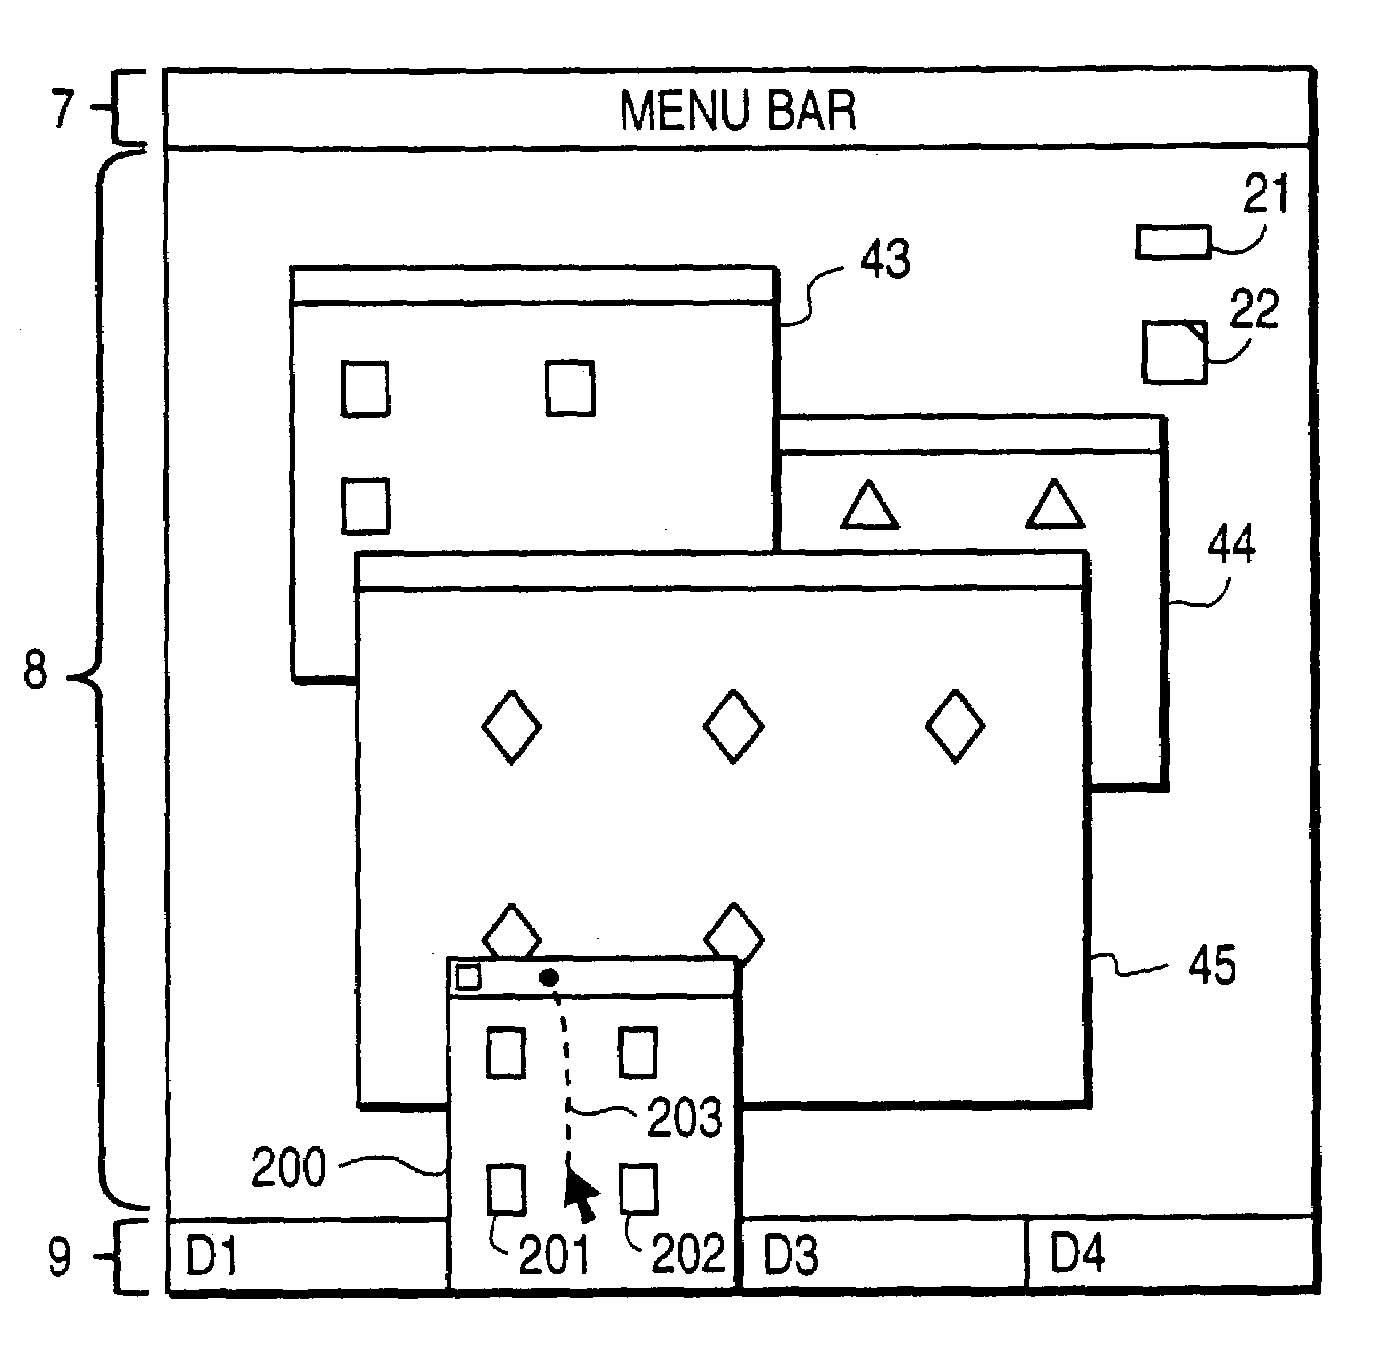 Computer system with graphical user interface including drawer-like windows